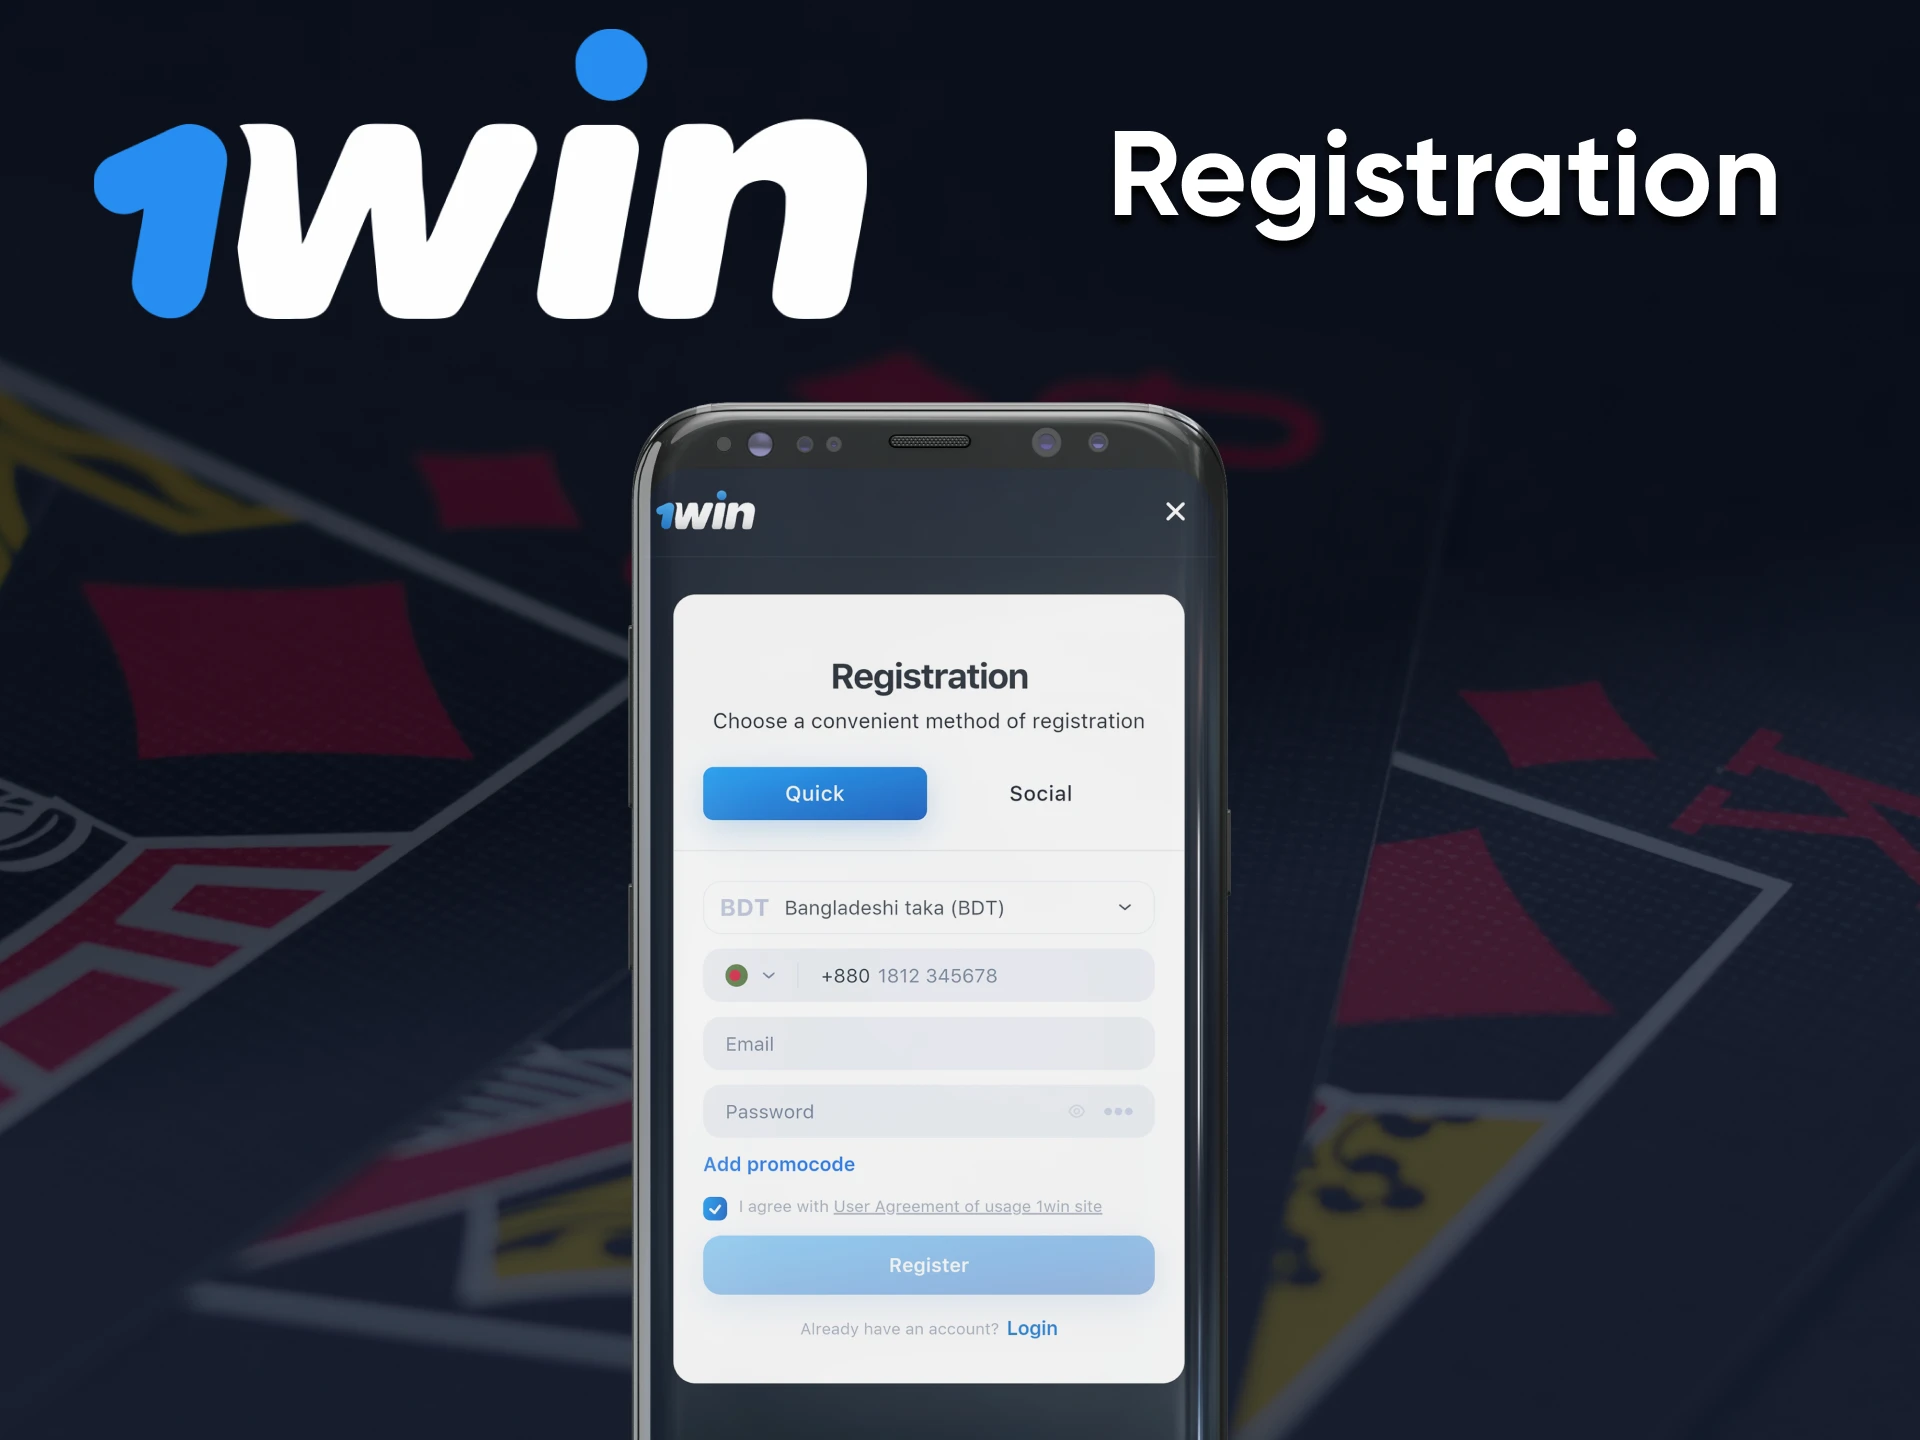 To start using the casino from 1win, go through the registration process.